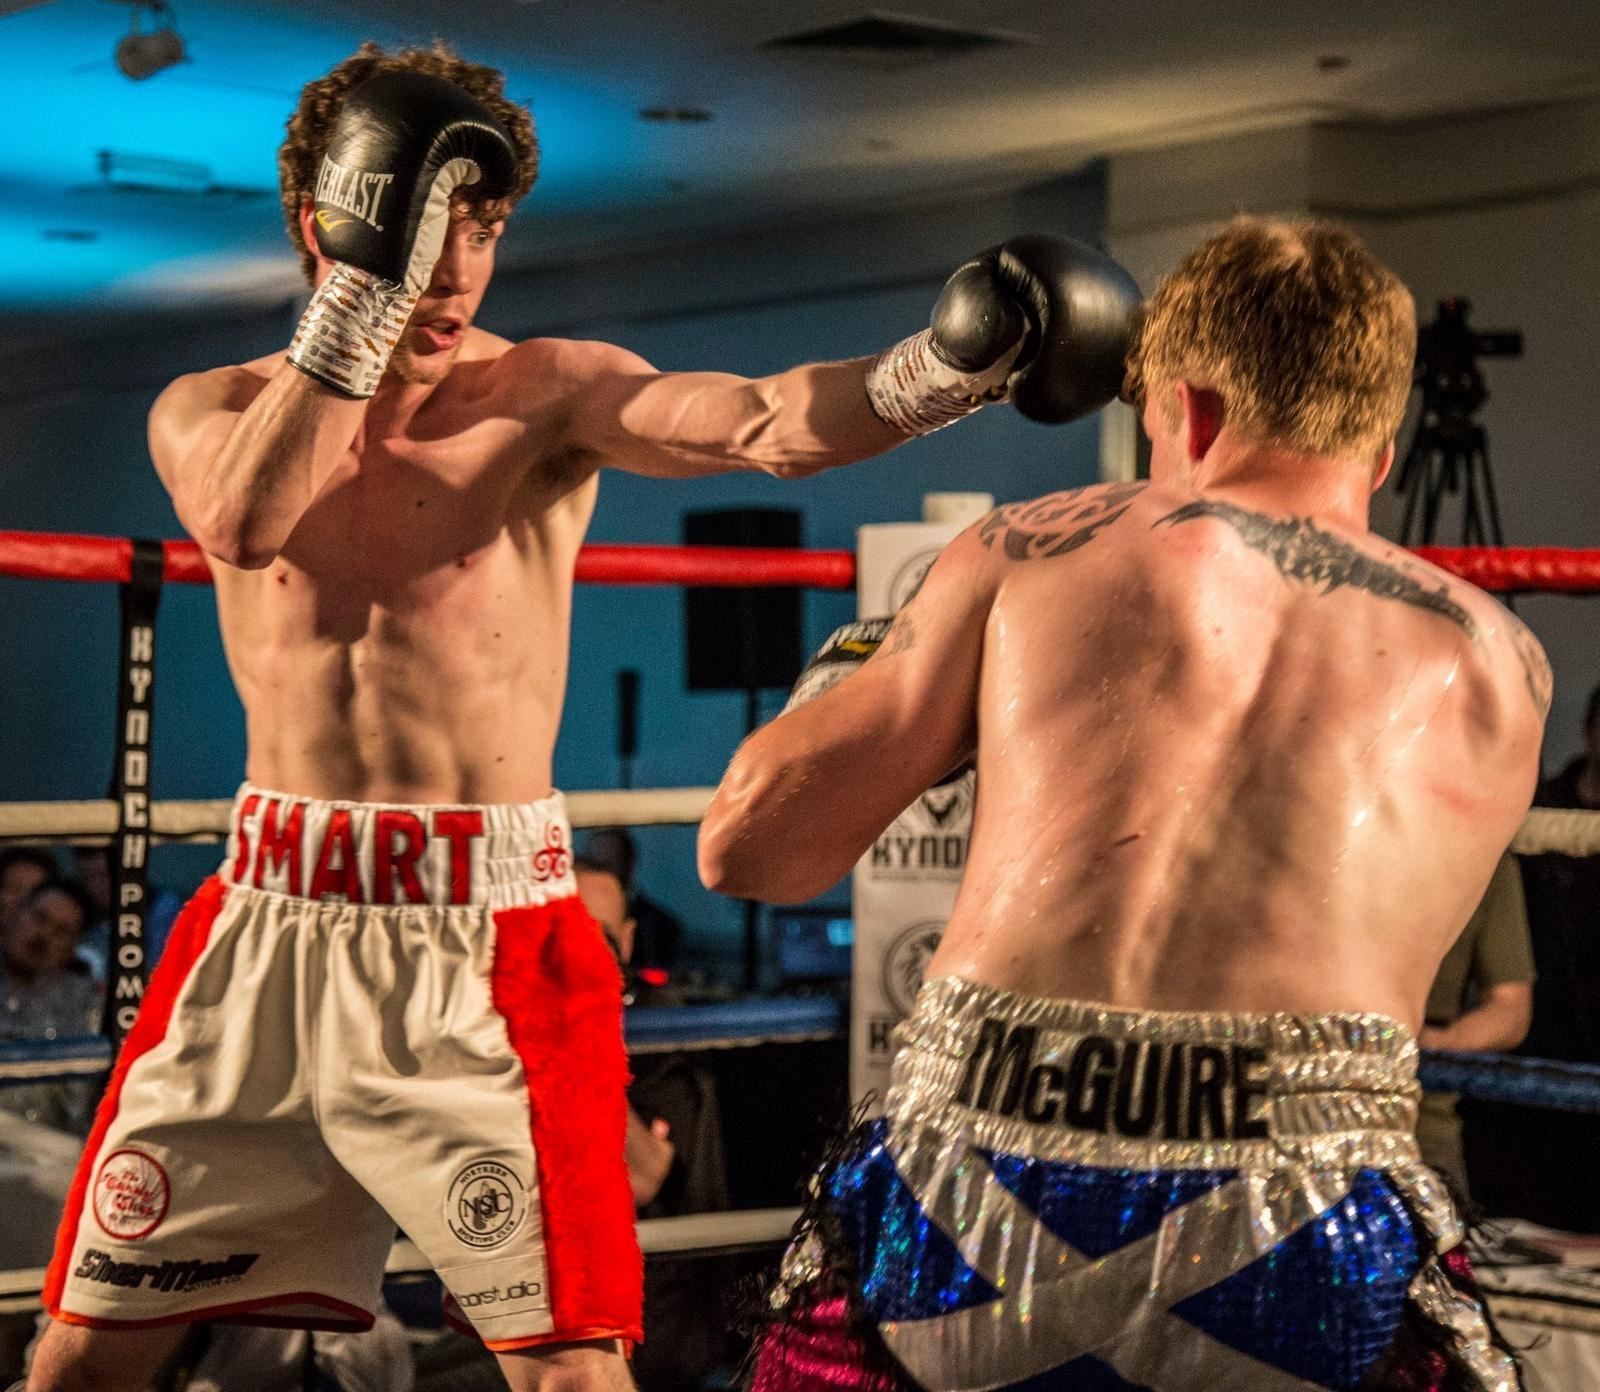 Andrew Smart won his second professional fight in May.